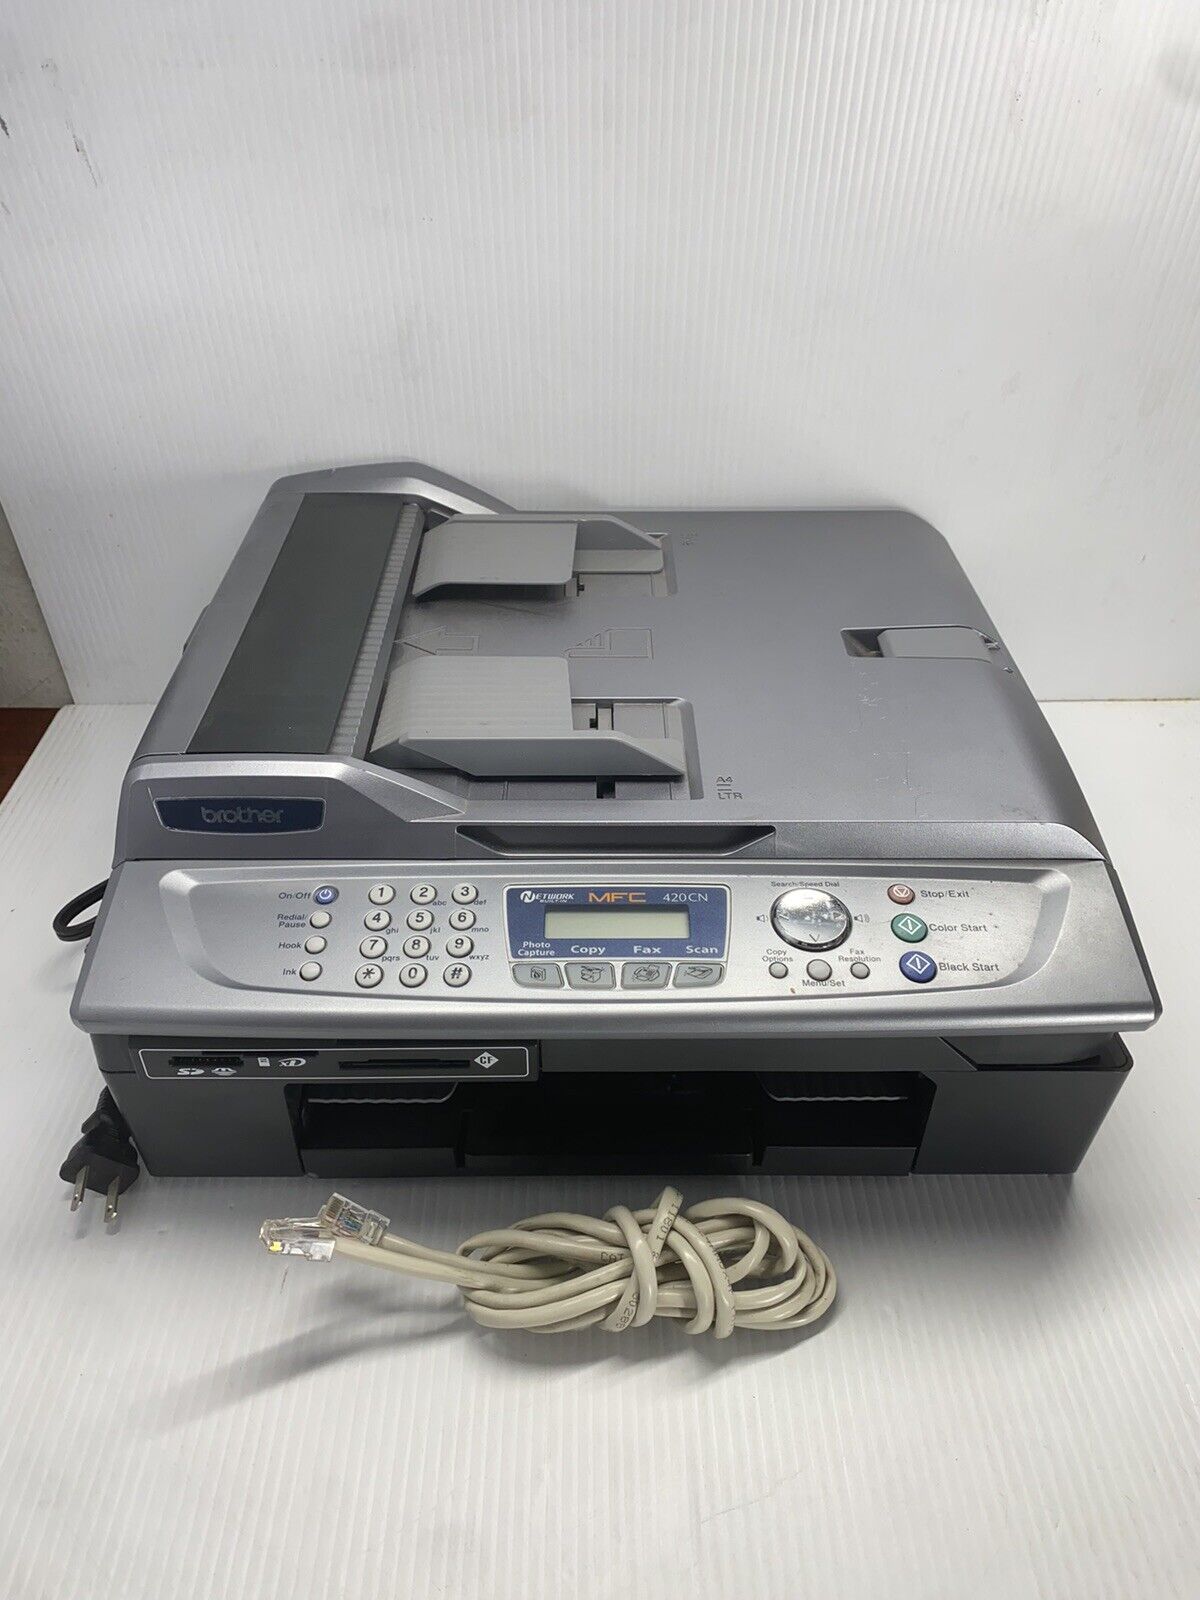 Brother MFC 420CN All In One Printer Fax Machine Copier MFC-420CN, -Works-